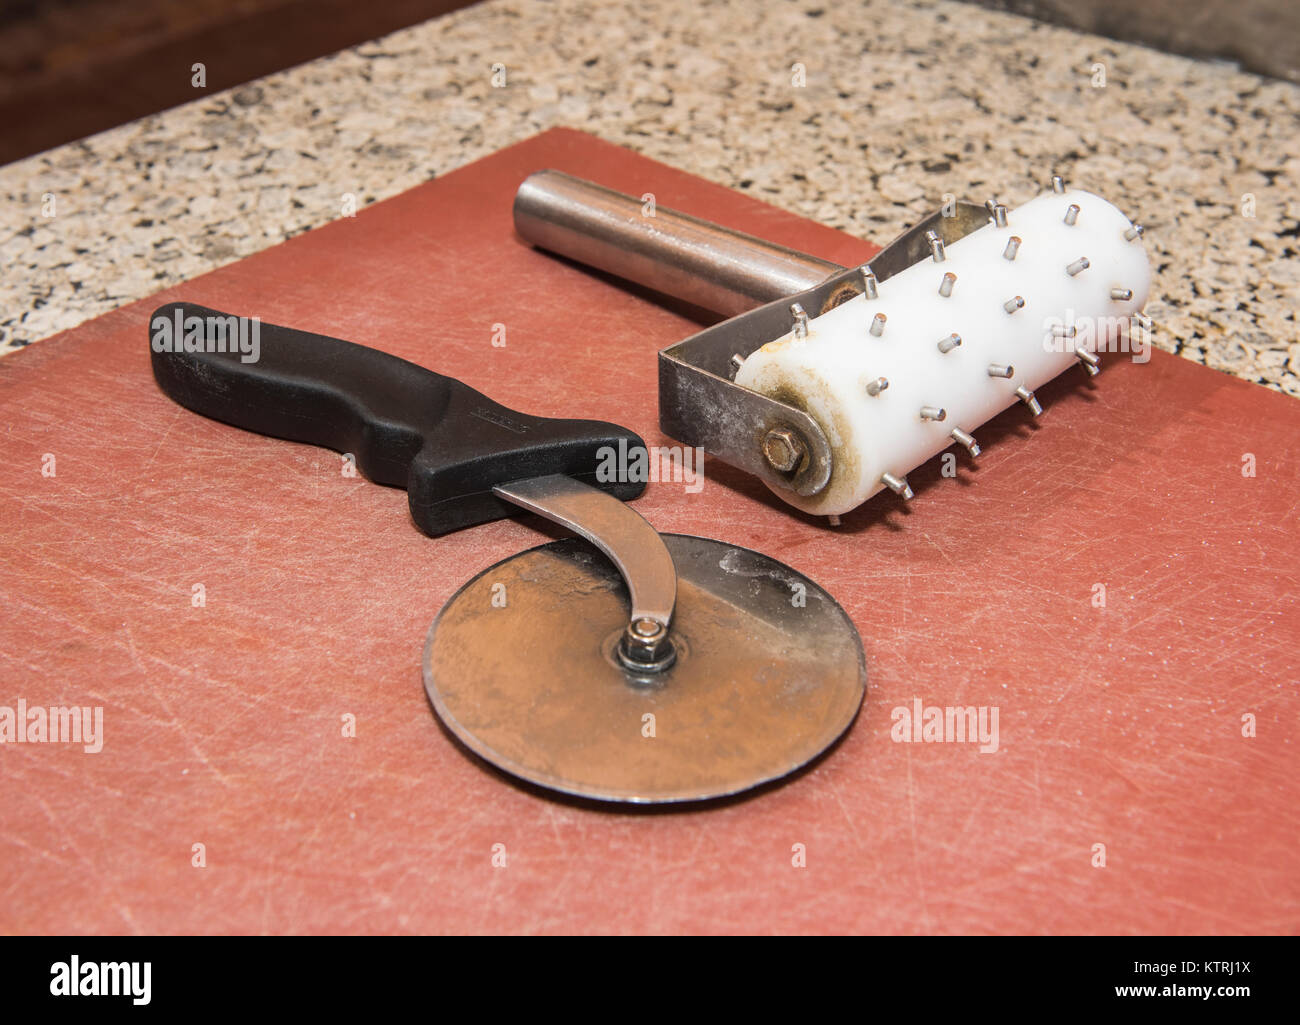 Pizza base roller and wheel cutter laying on chopping board at fast food snack bar Stock Photo